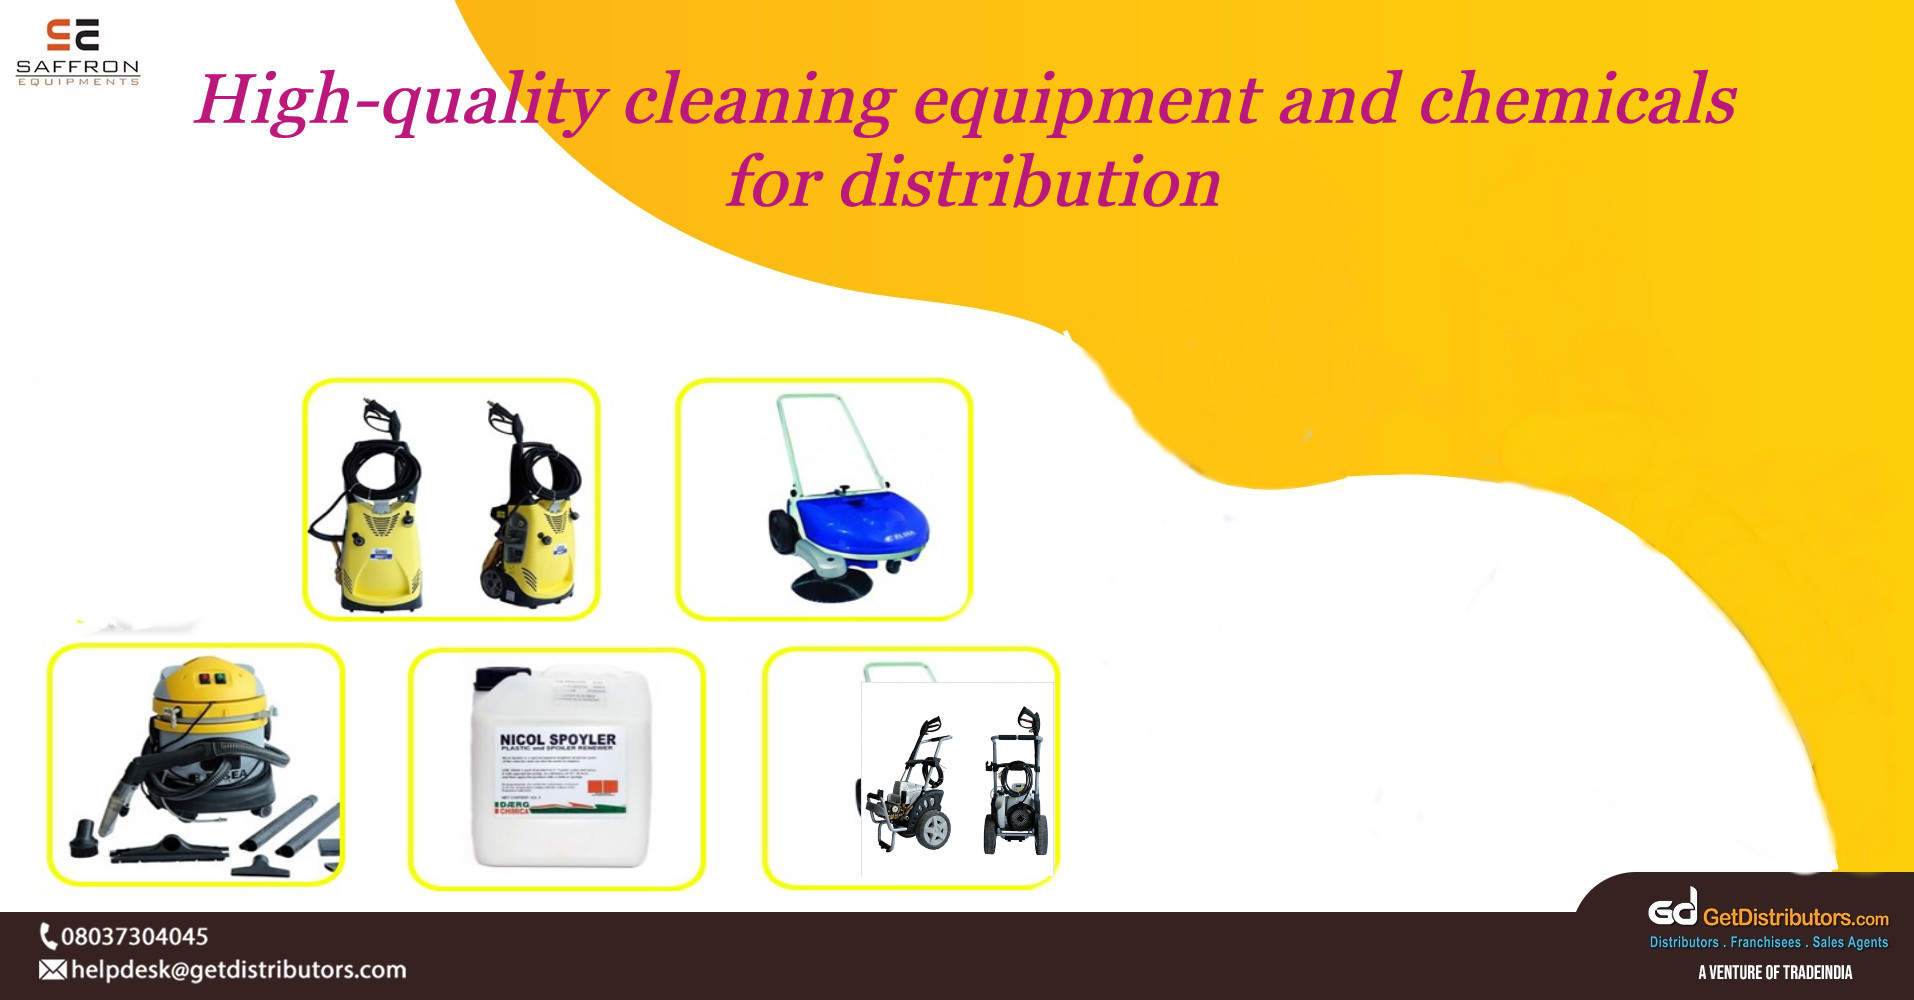 High-quality cleaning equipment and chemicals for distribution